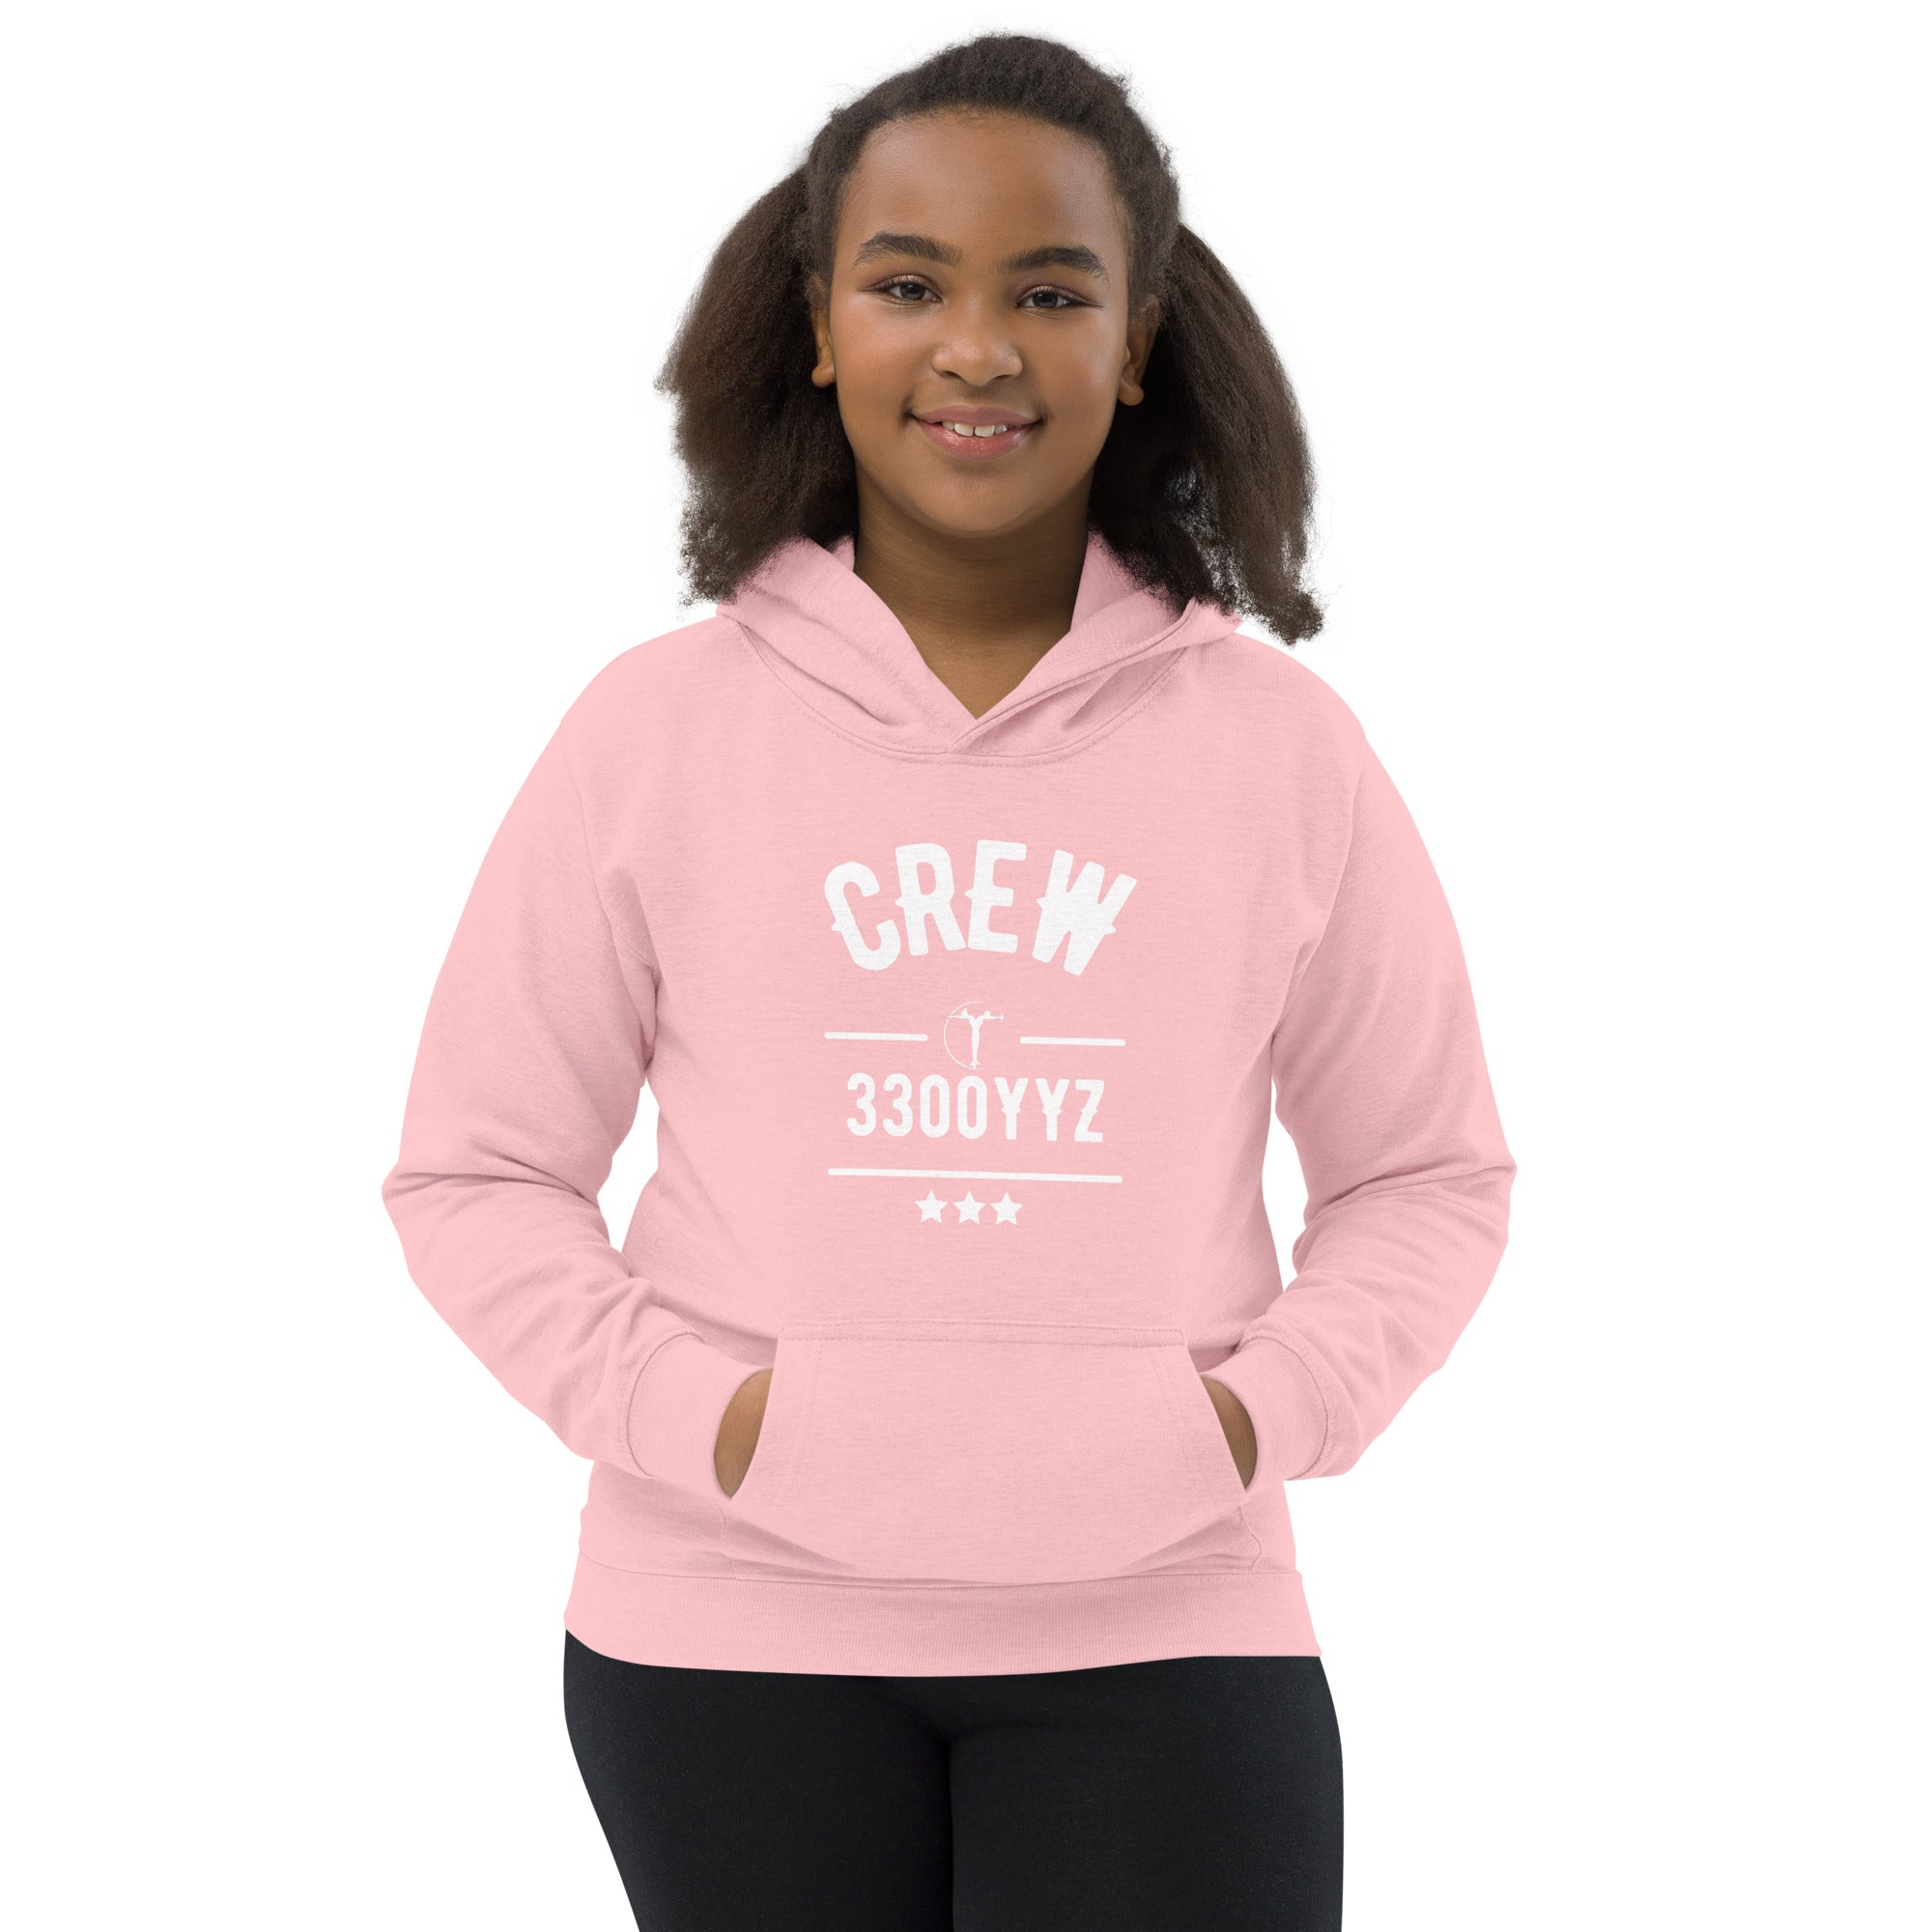 CREW Collection Hoodie - Youth - TandemWear